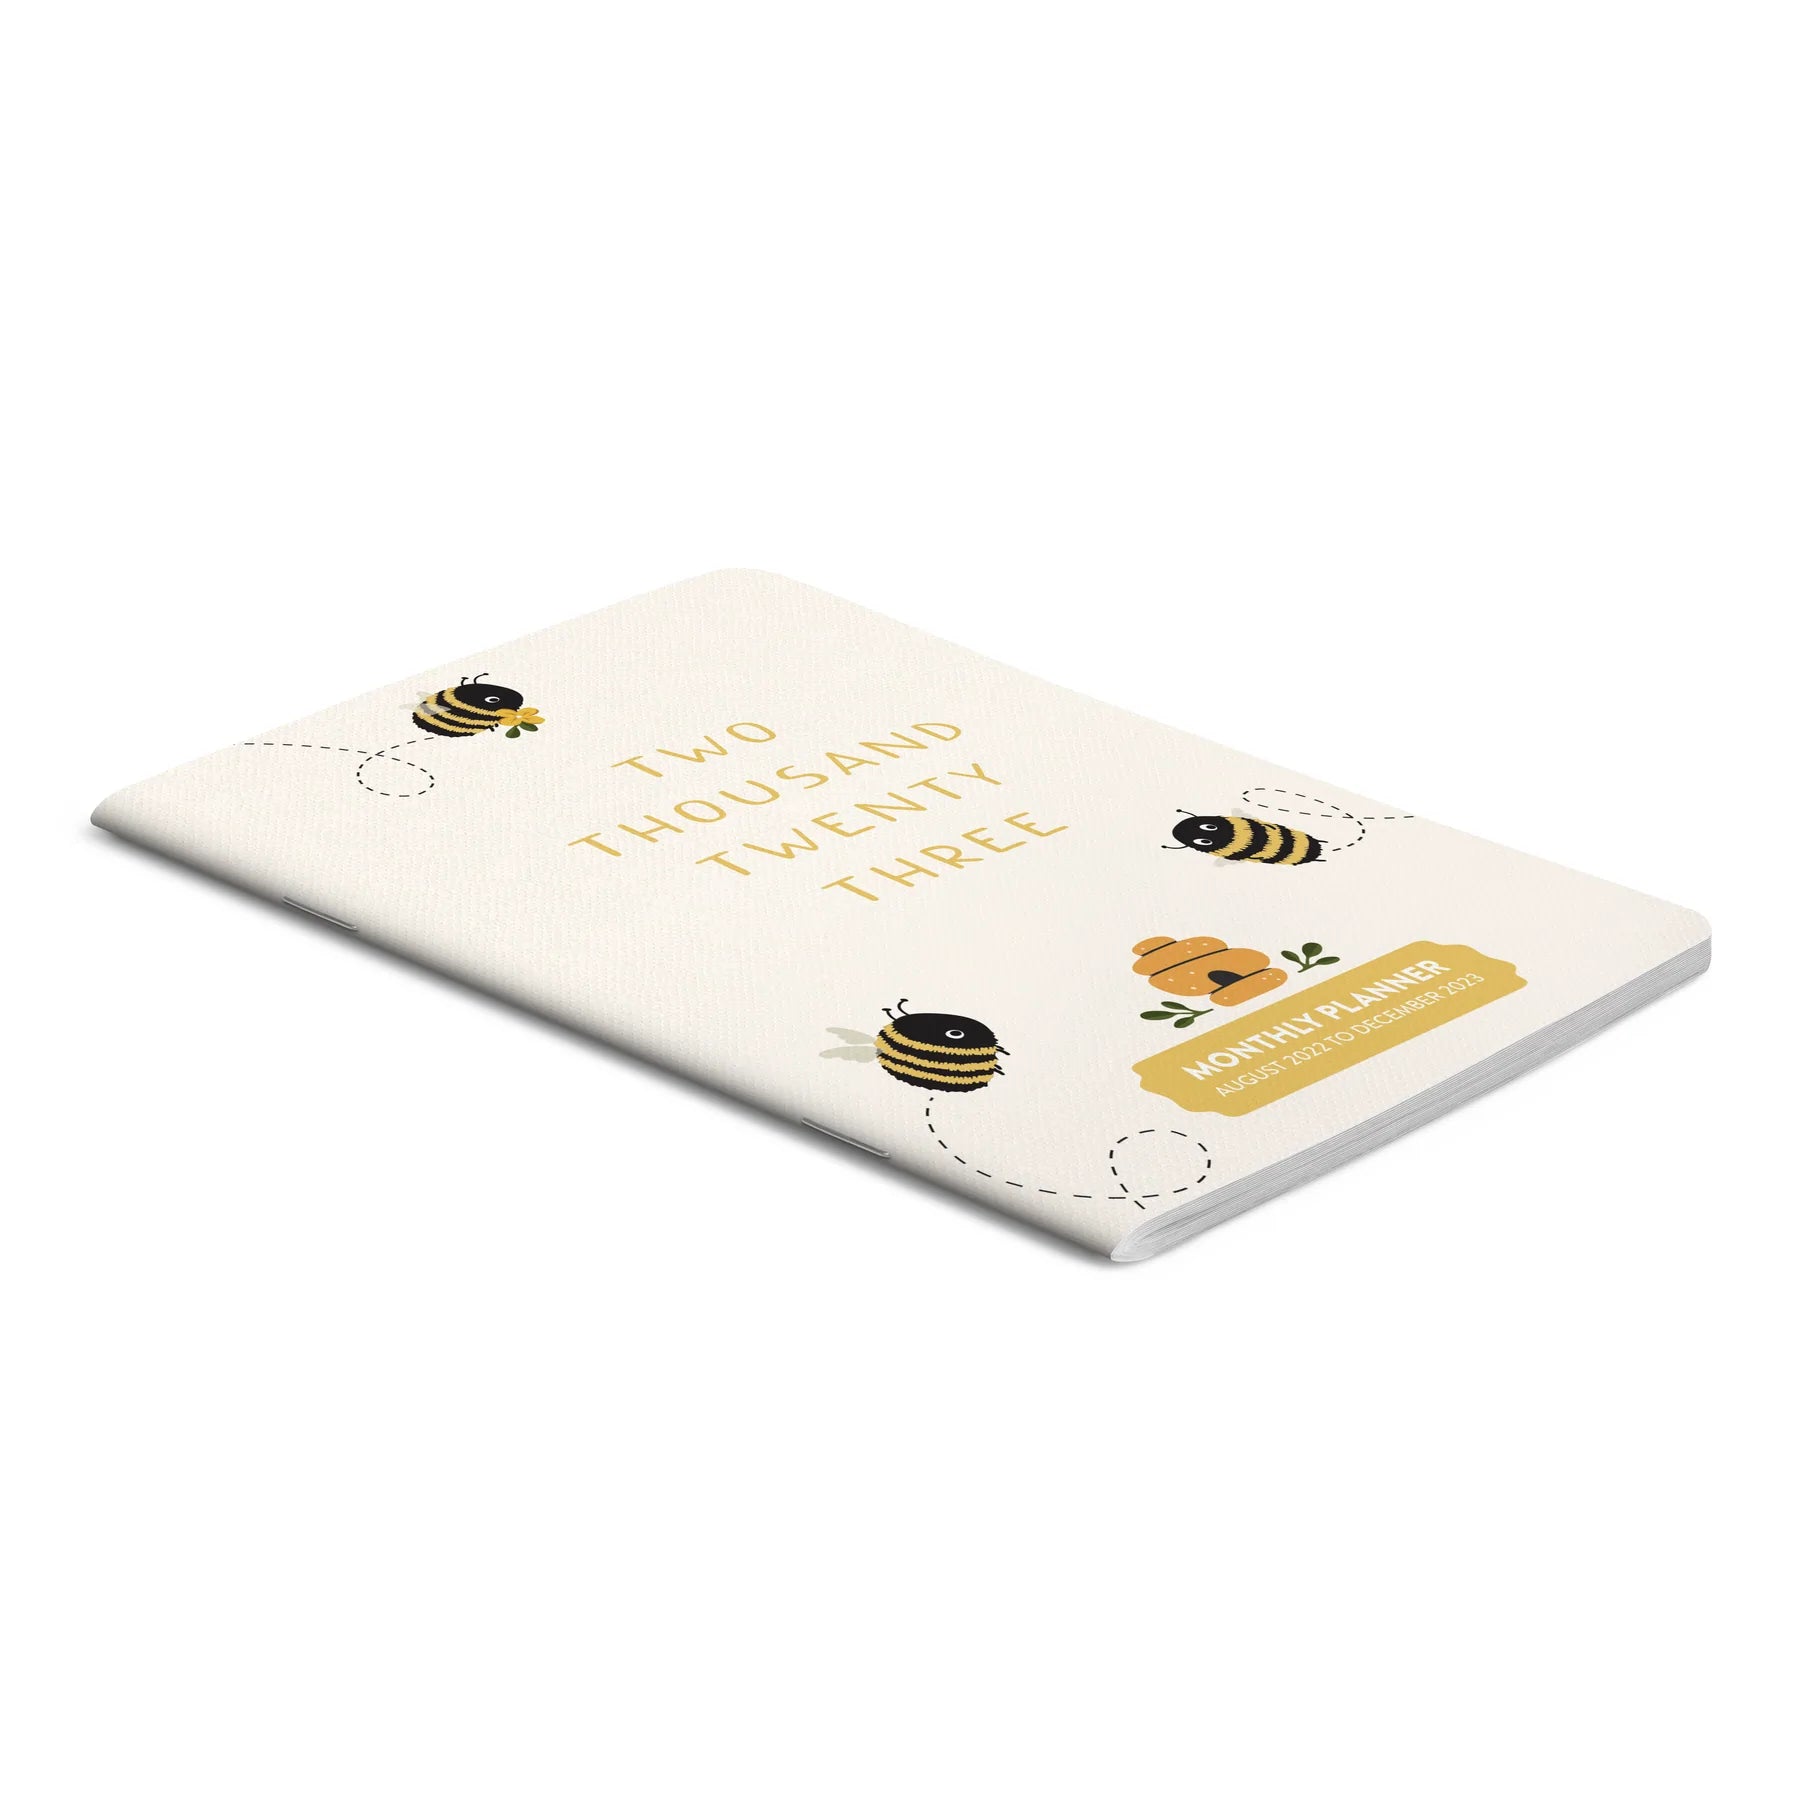 2023 Buzzy Bees (Monthly Planner) - Pocket Diary/Planner